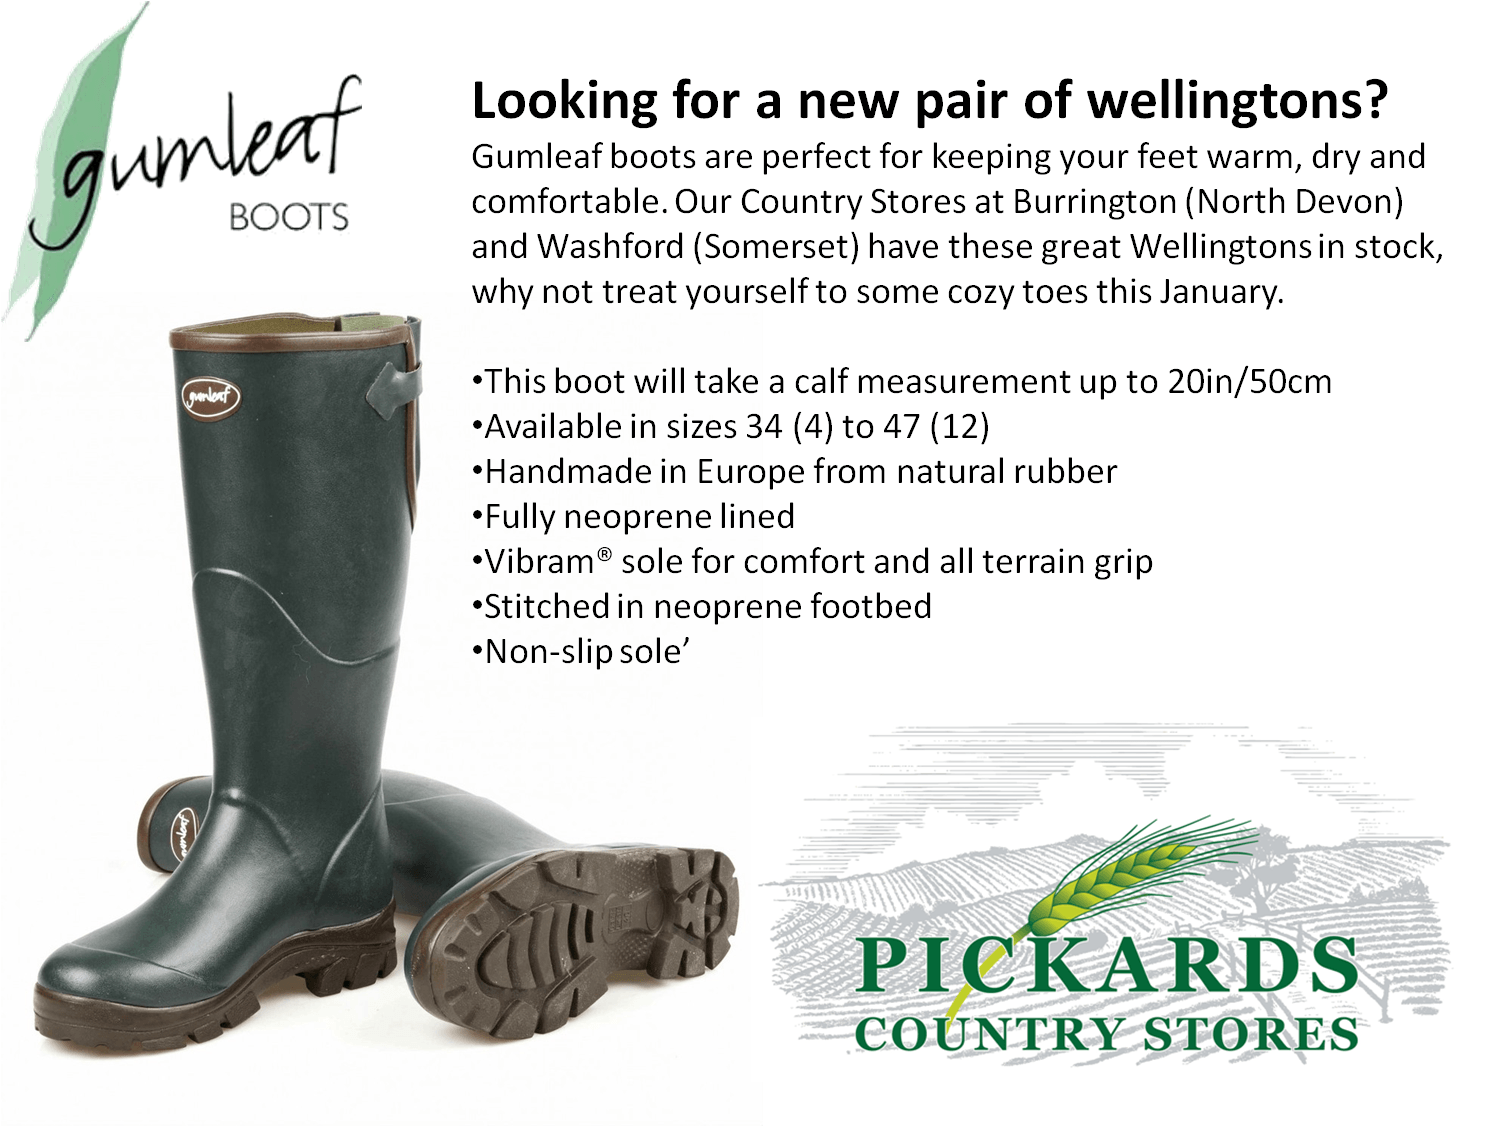 an advertisement for gumleaf boots says they are perfect for keeping your feet warm and comfortable